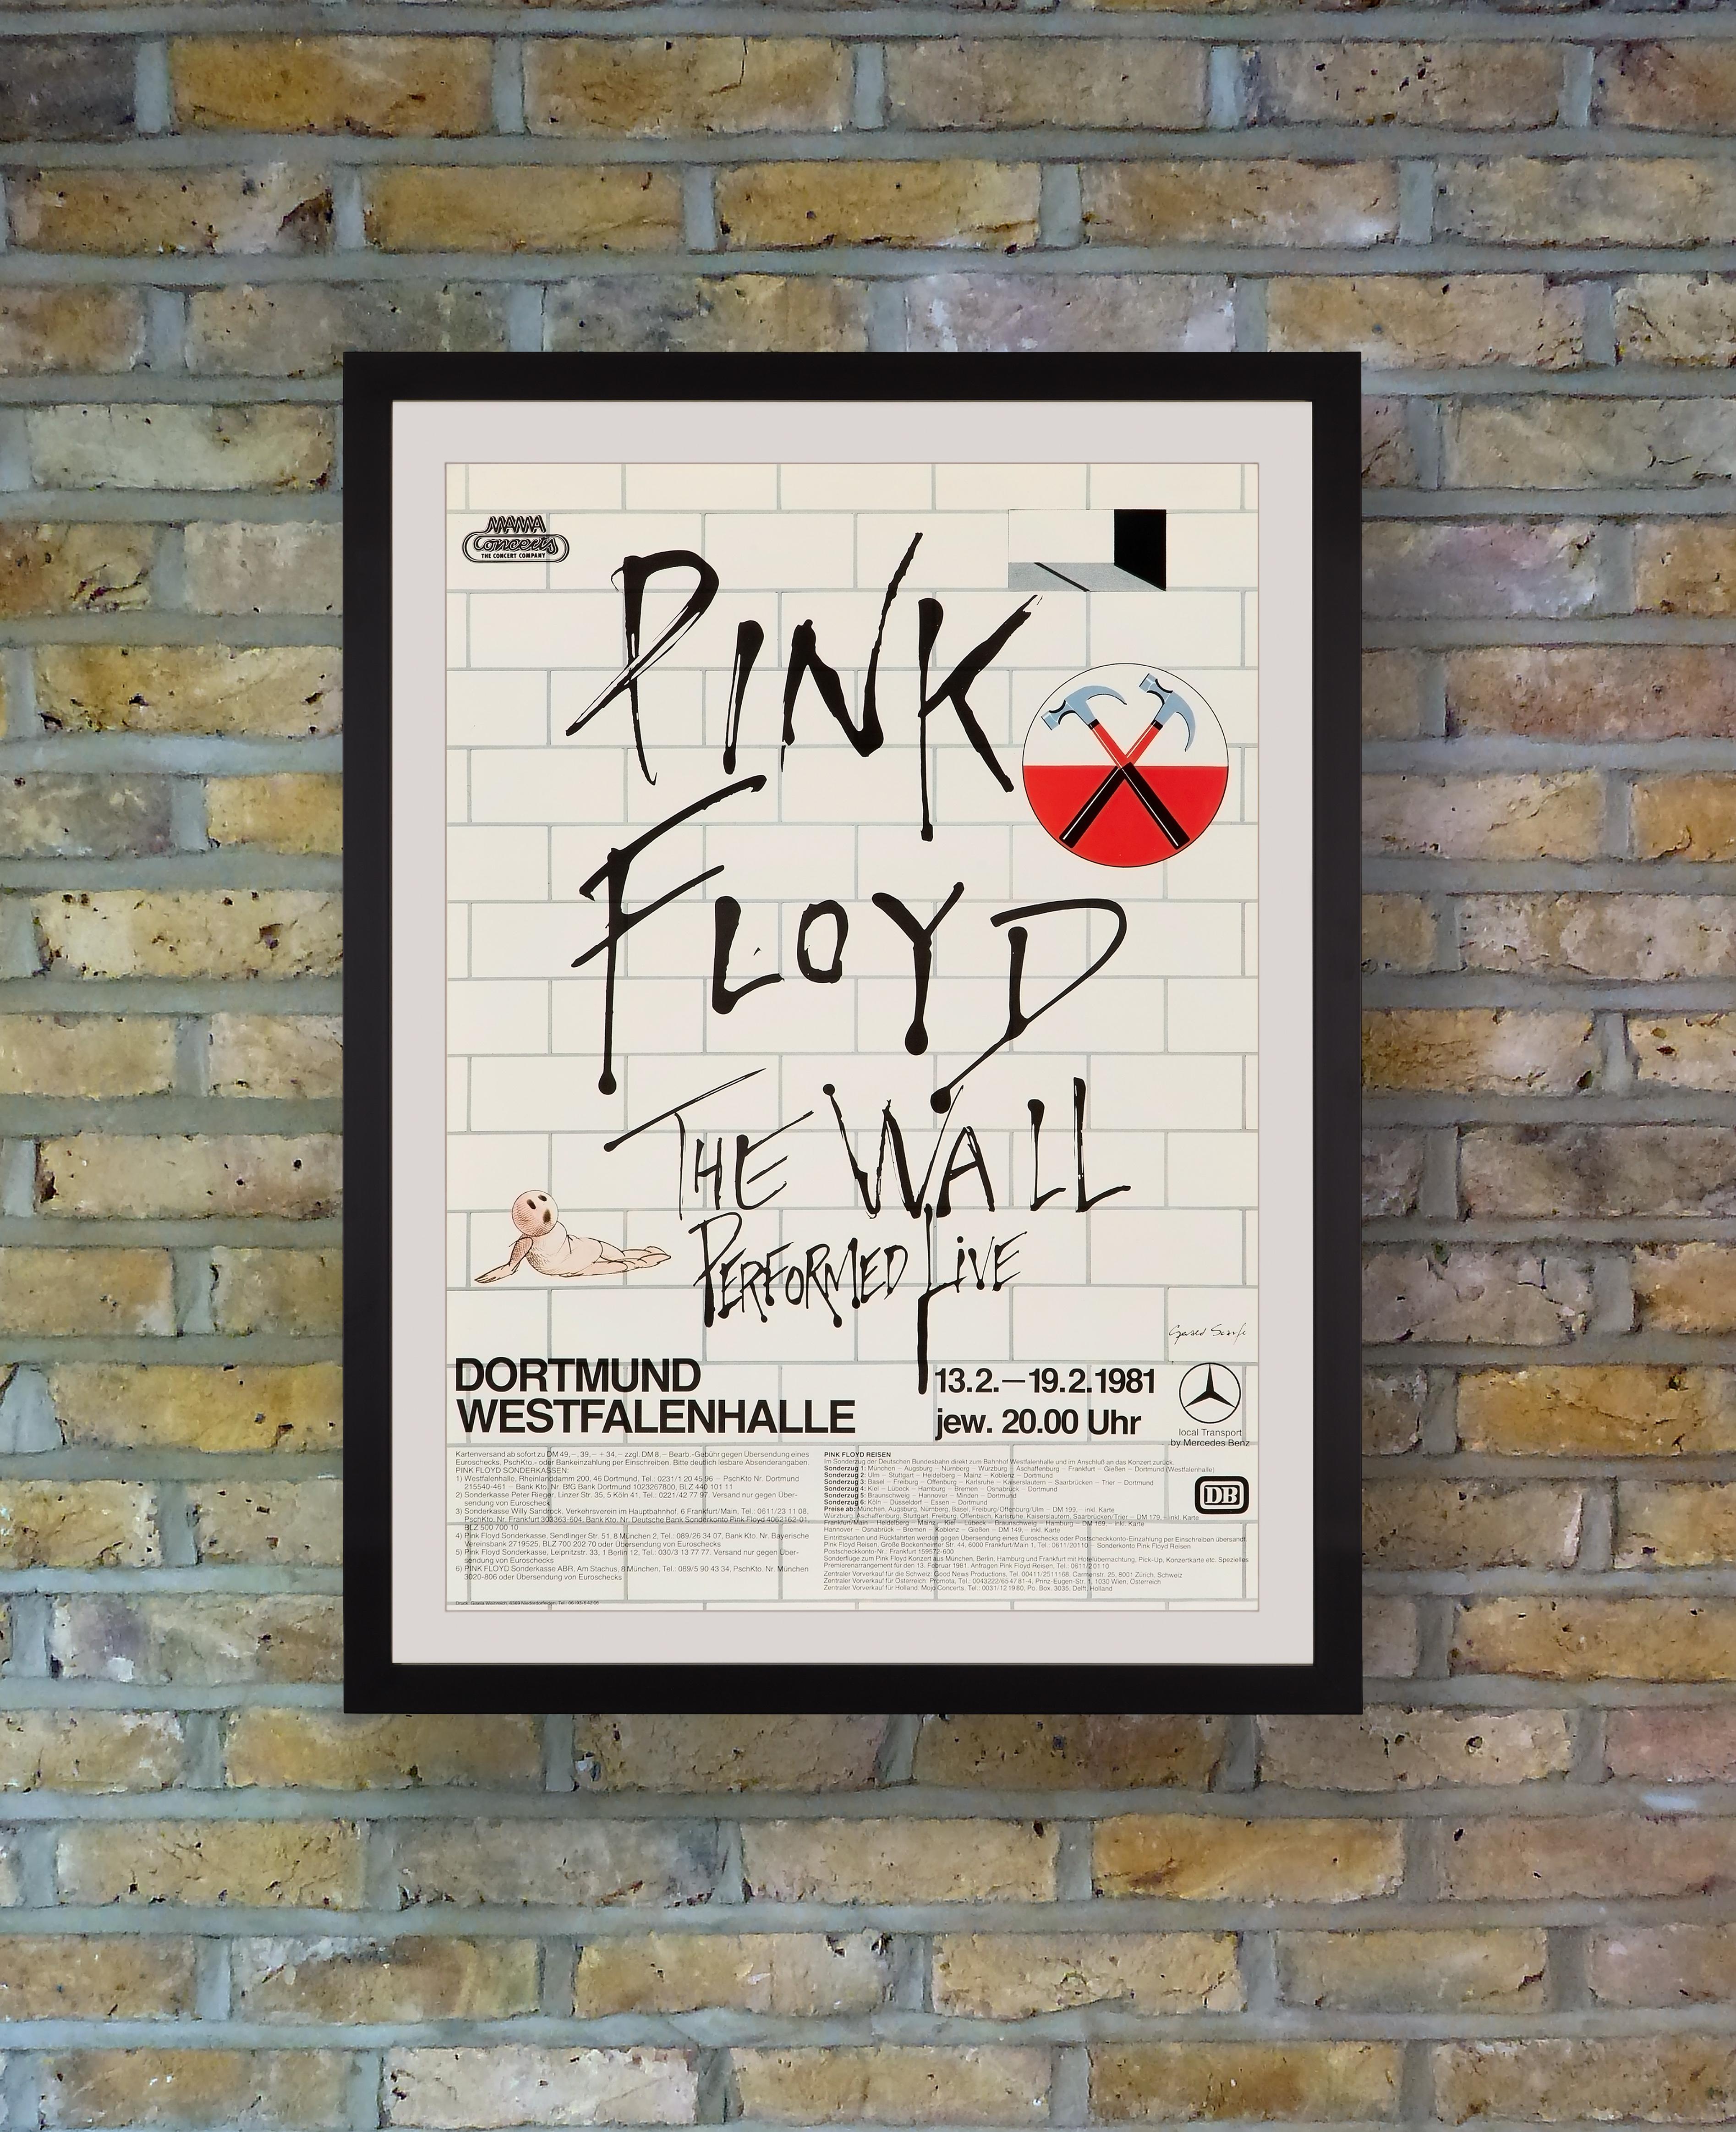 A tour poster for a series of performances of The Wall by Pink Floyd at the Westfalenhalle, Dortmund, Germany, from 13-19th February 1981. Based on a narrative concept by Roger Waters, Pink Floyd's seminal 1979 album 'The Wall' had sprung from